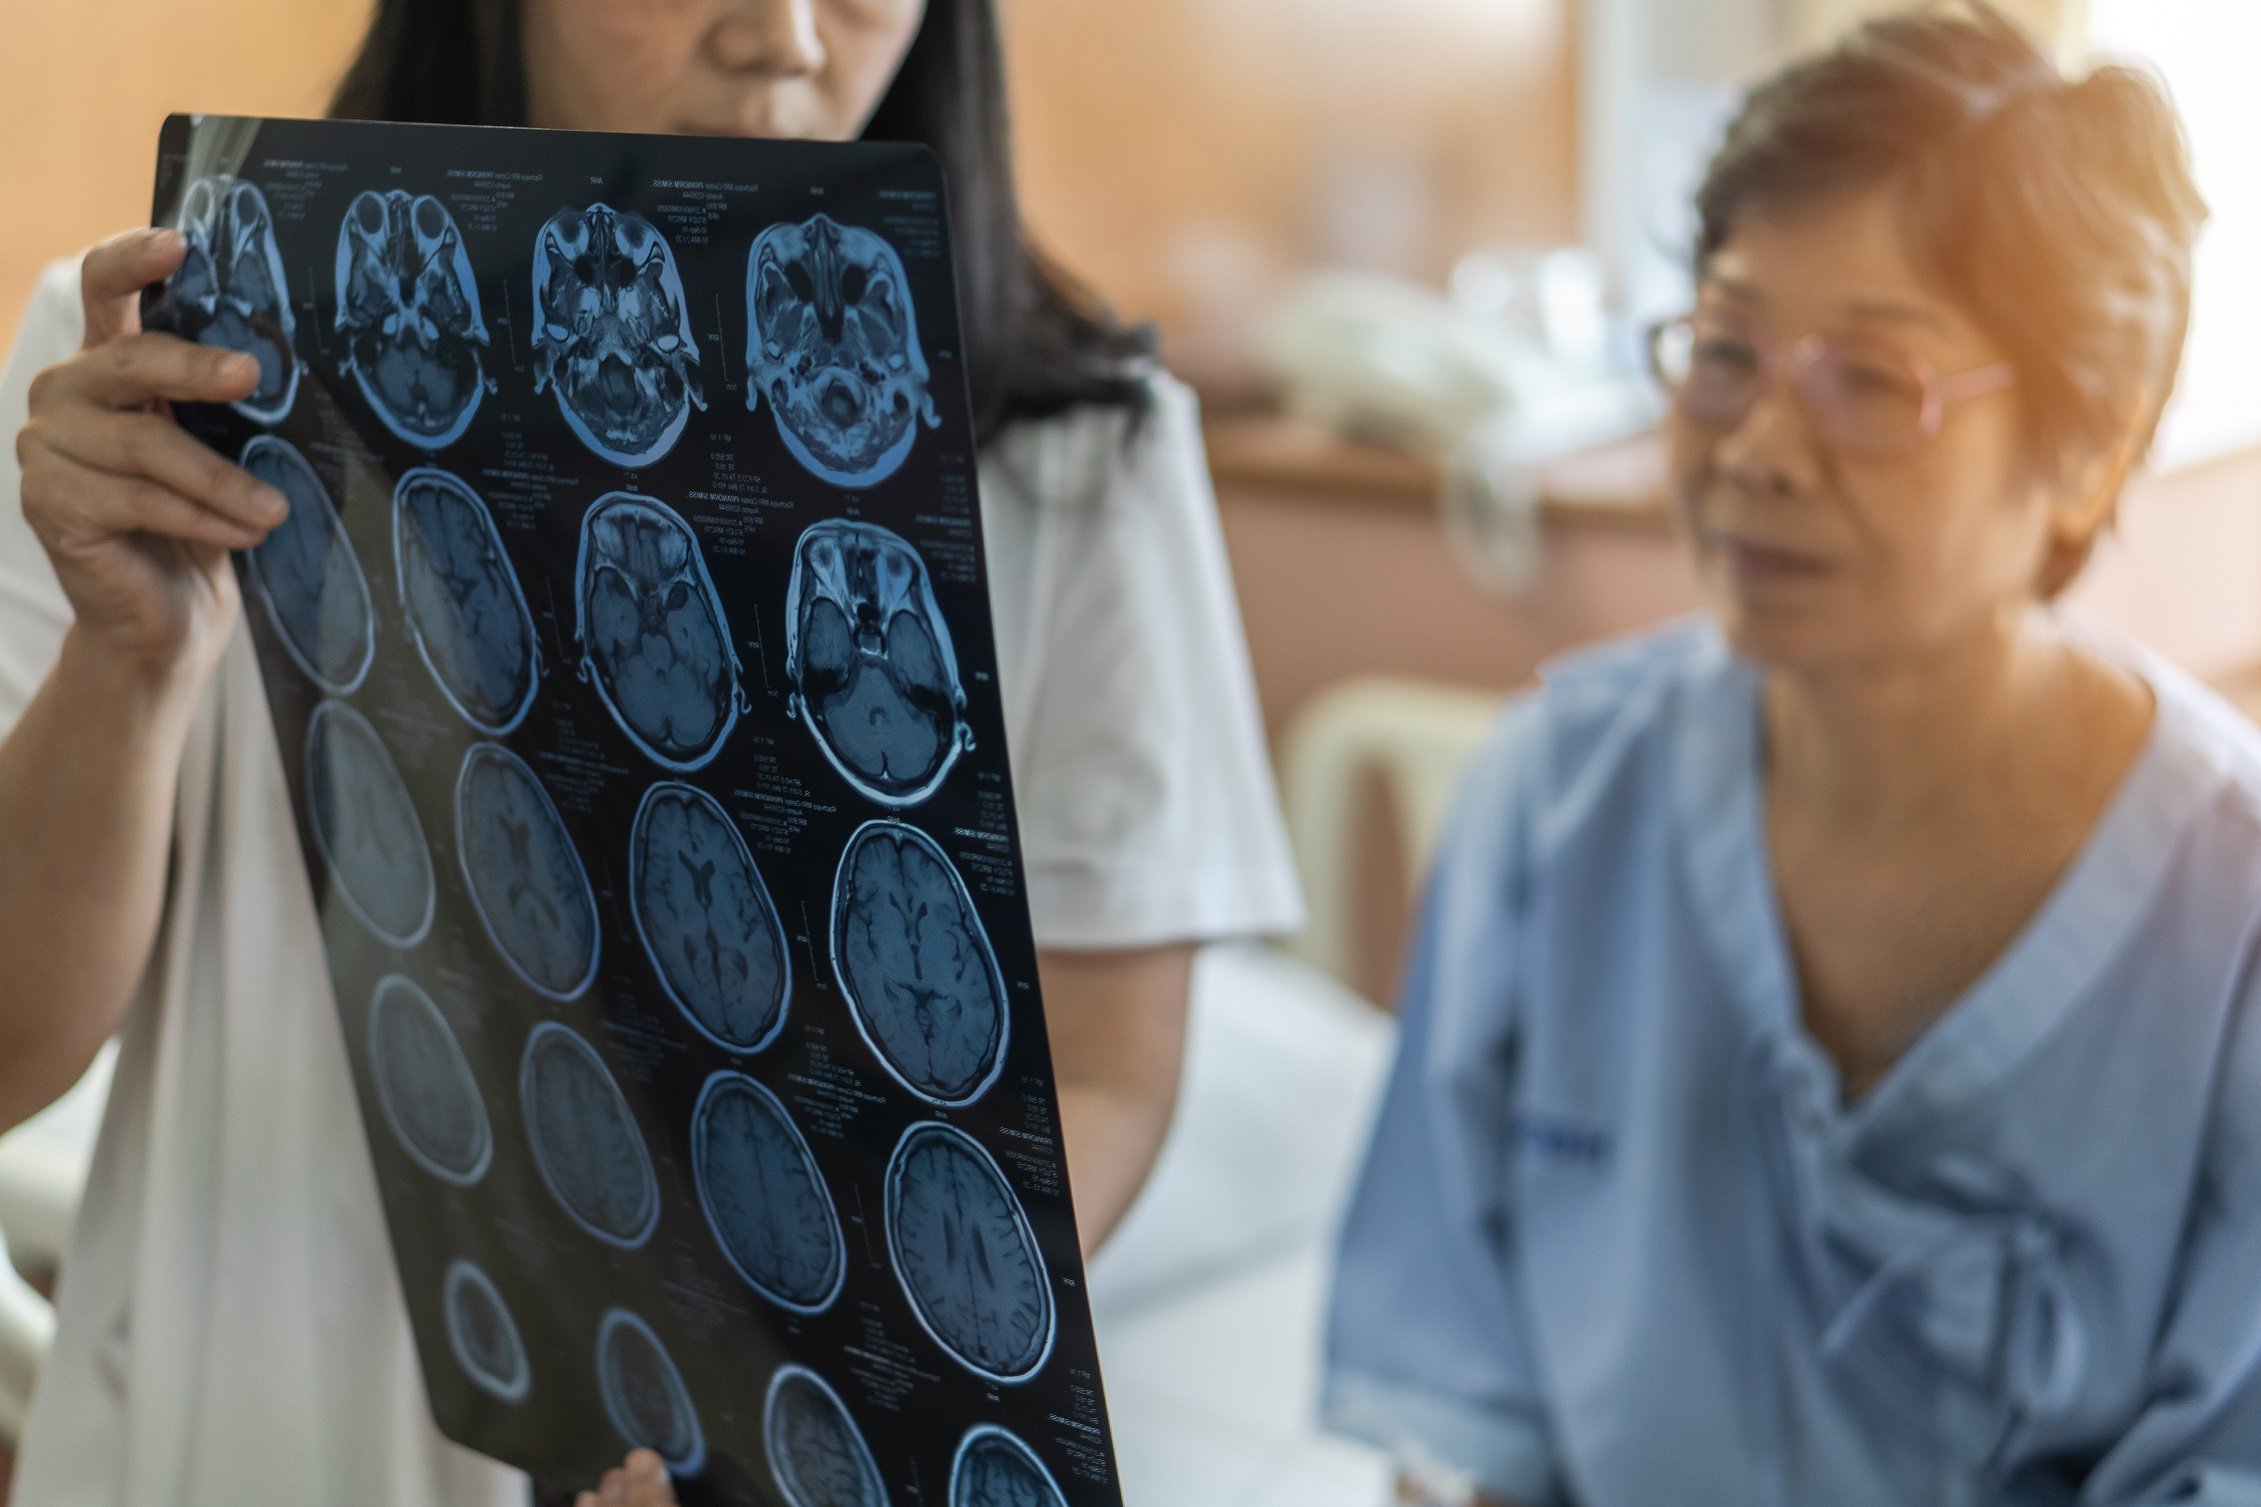 early diagnose dementia, early diagnose Alzheimer's